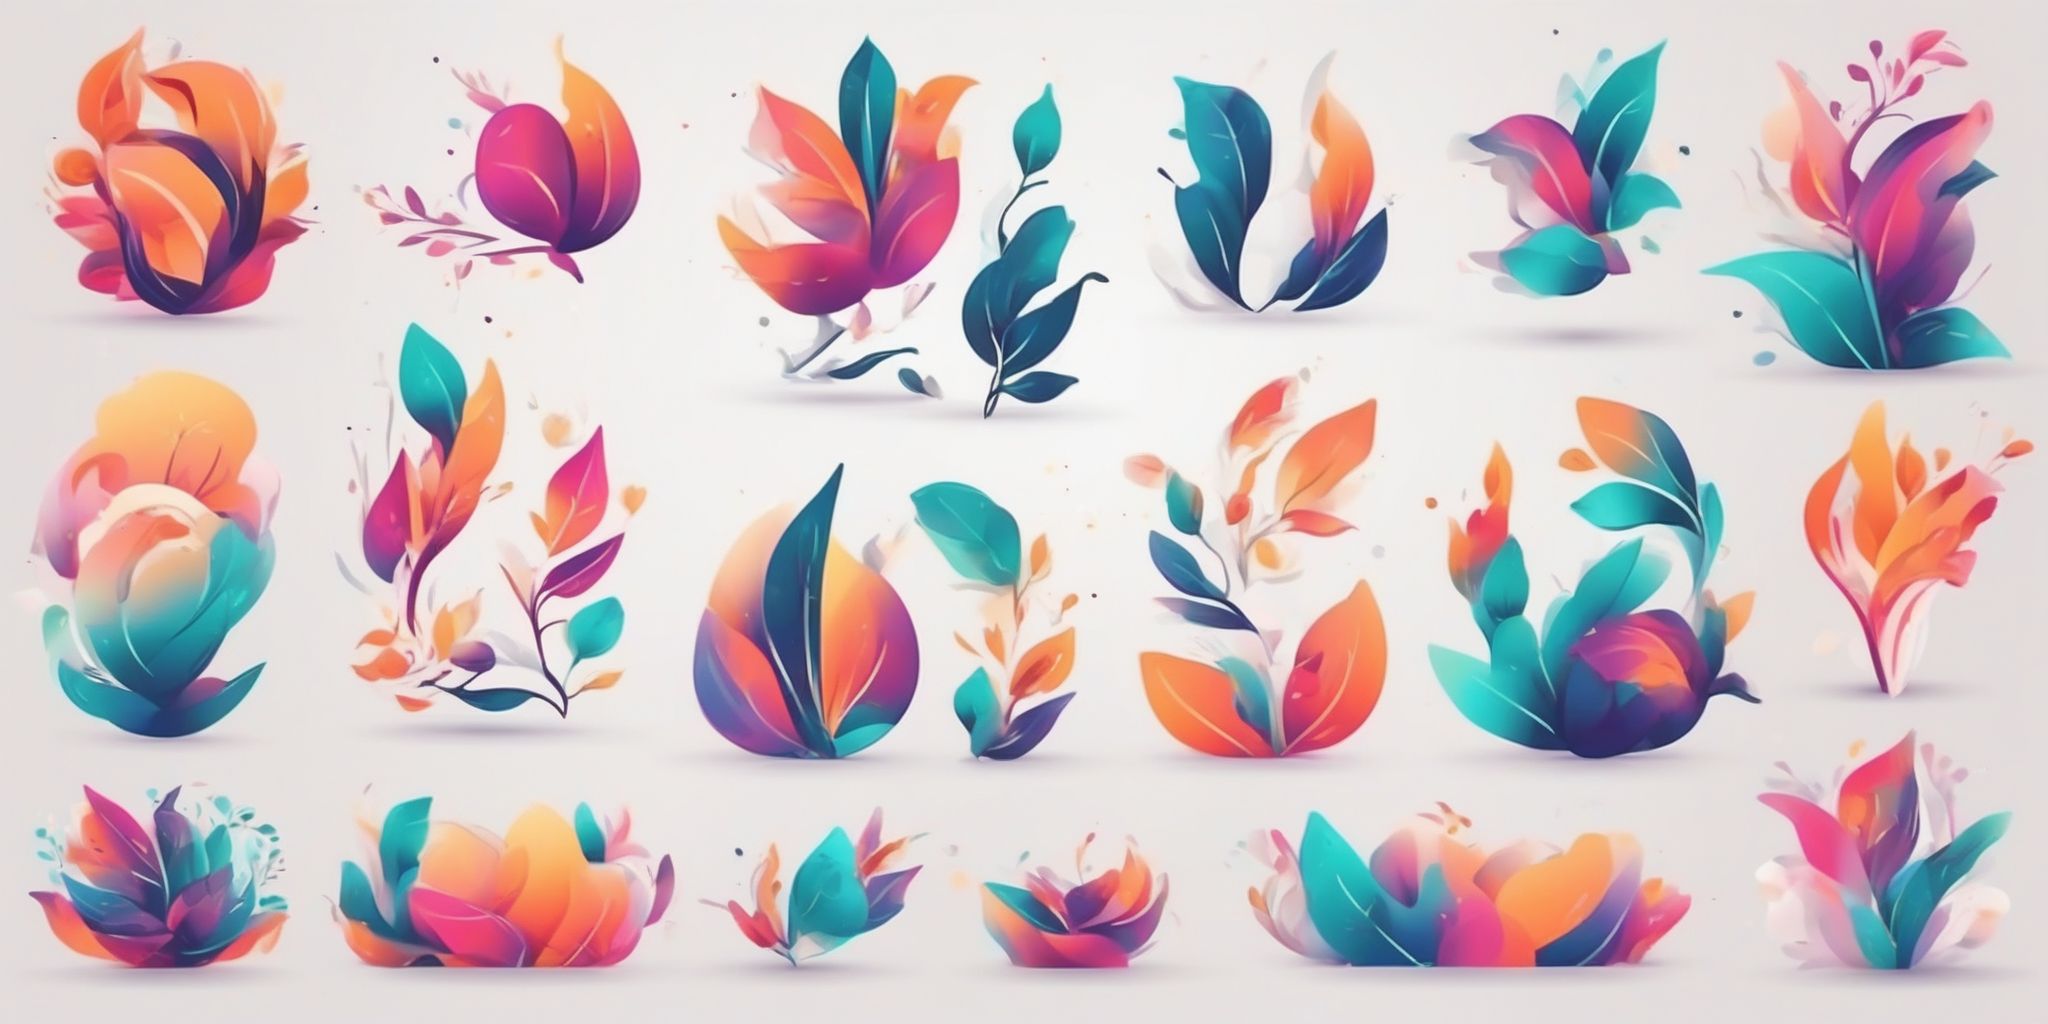 Brand in illustration style with gradients and white background